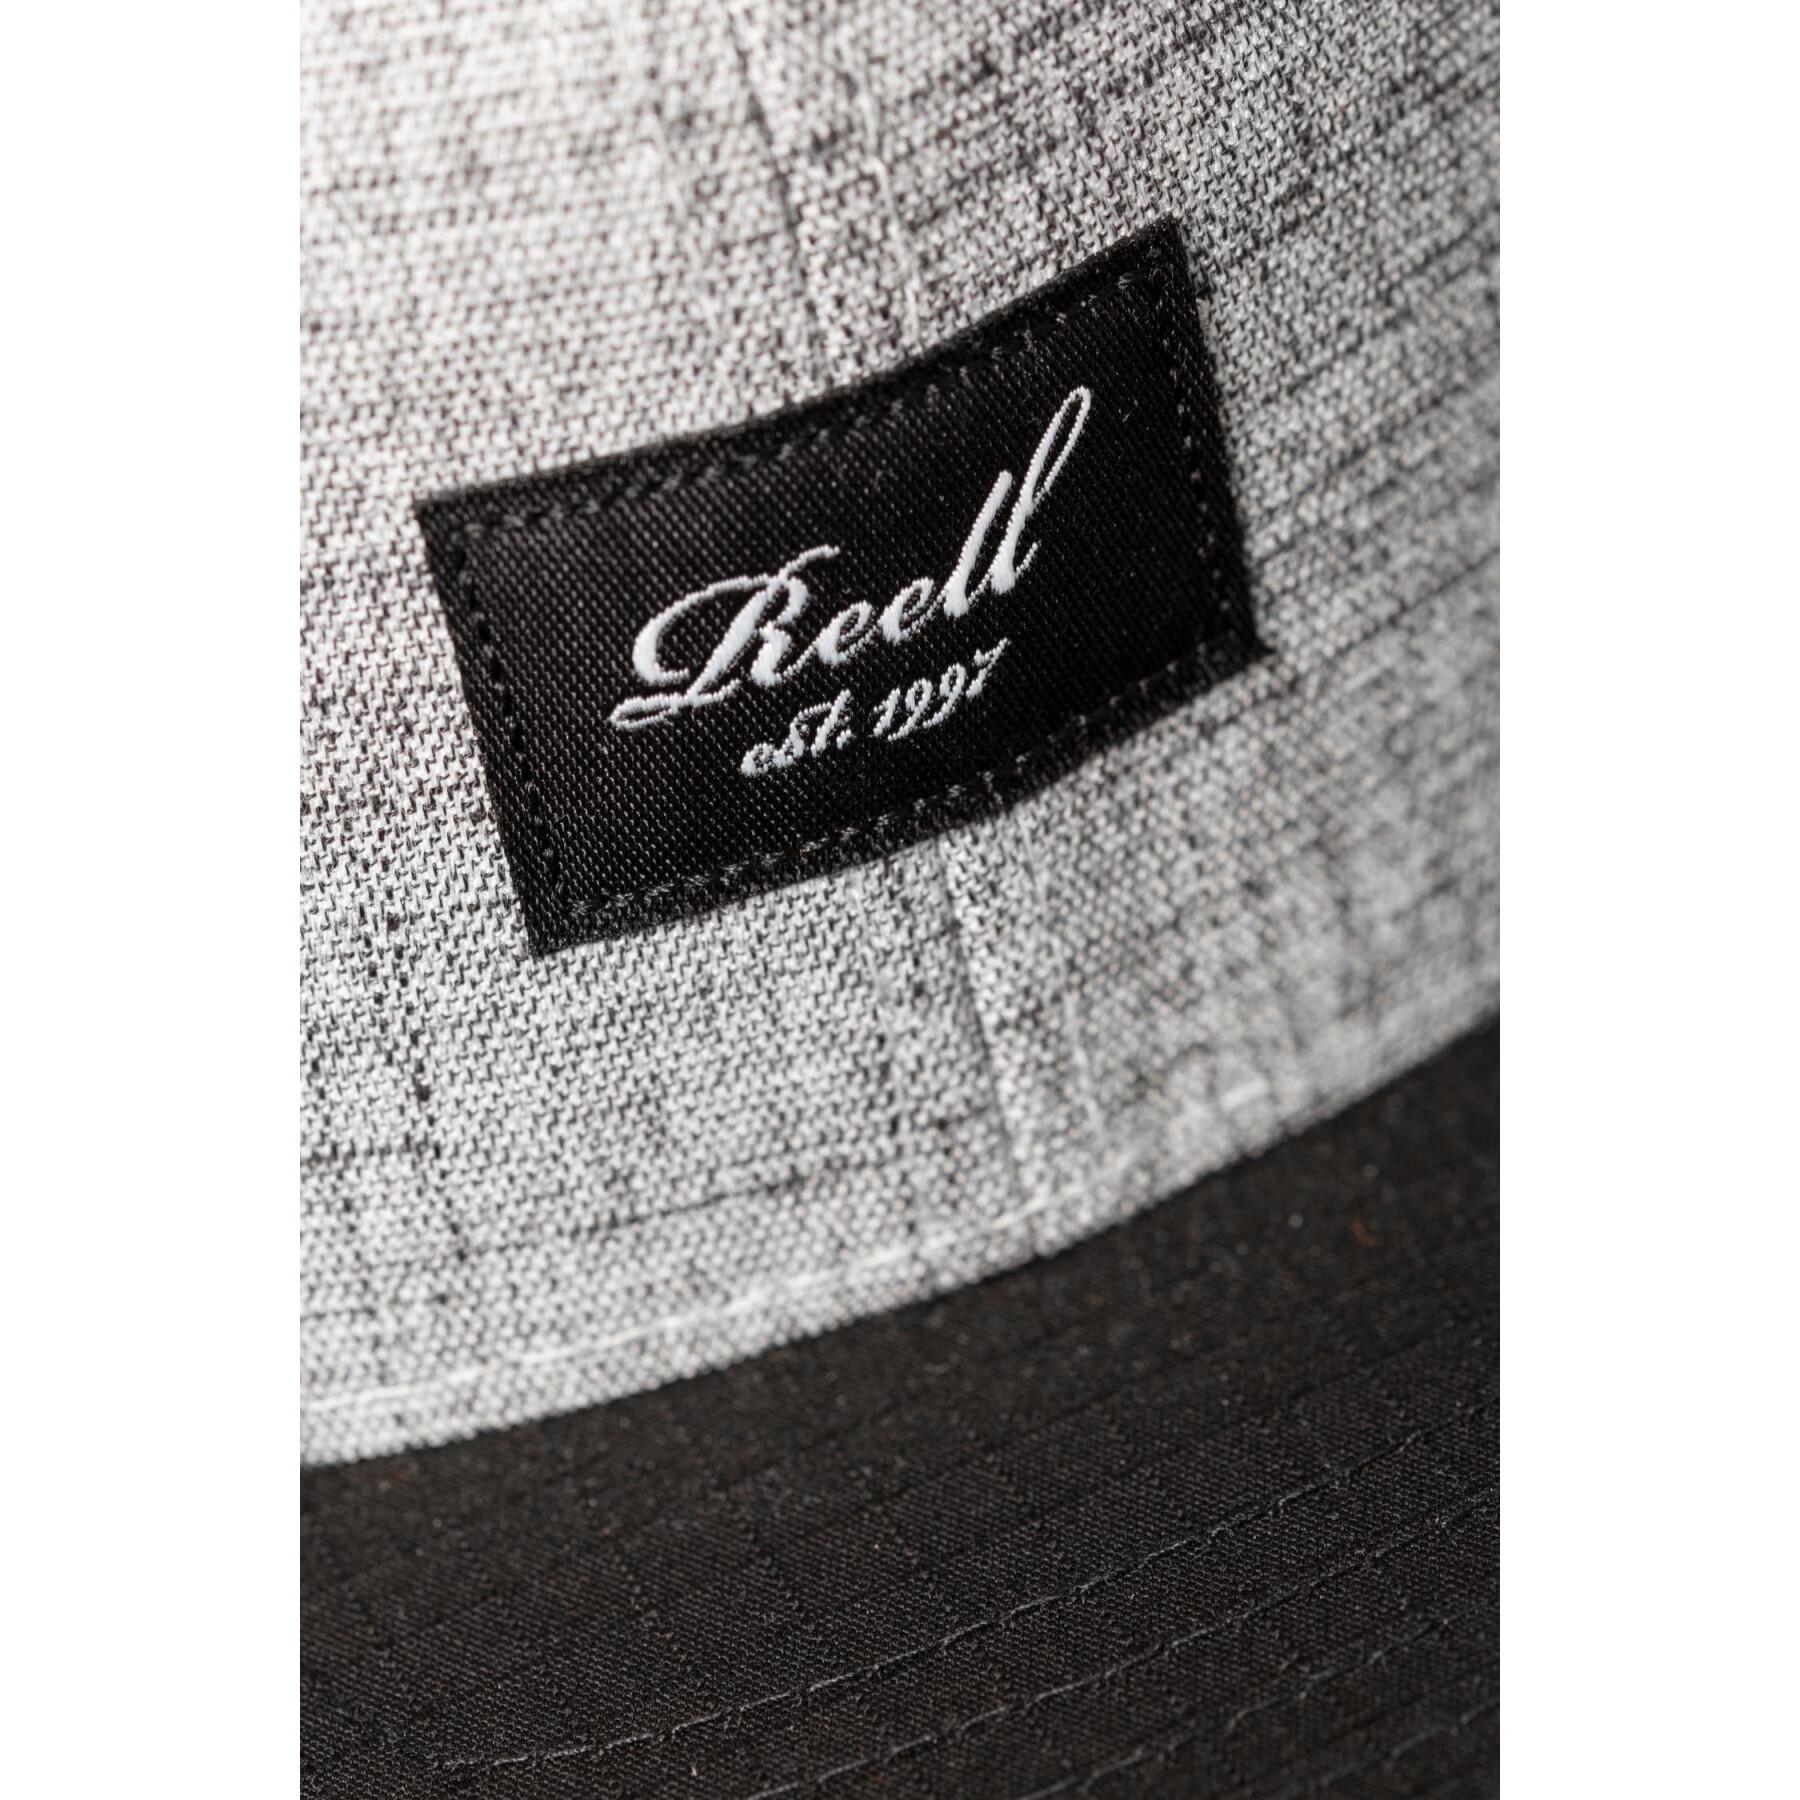 Gorra Reell Pitchout